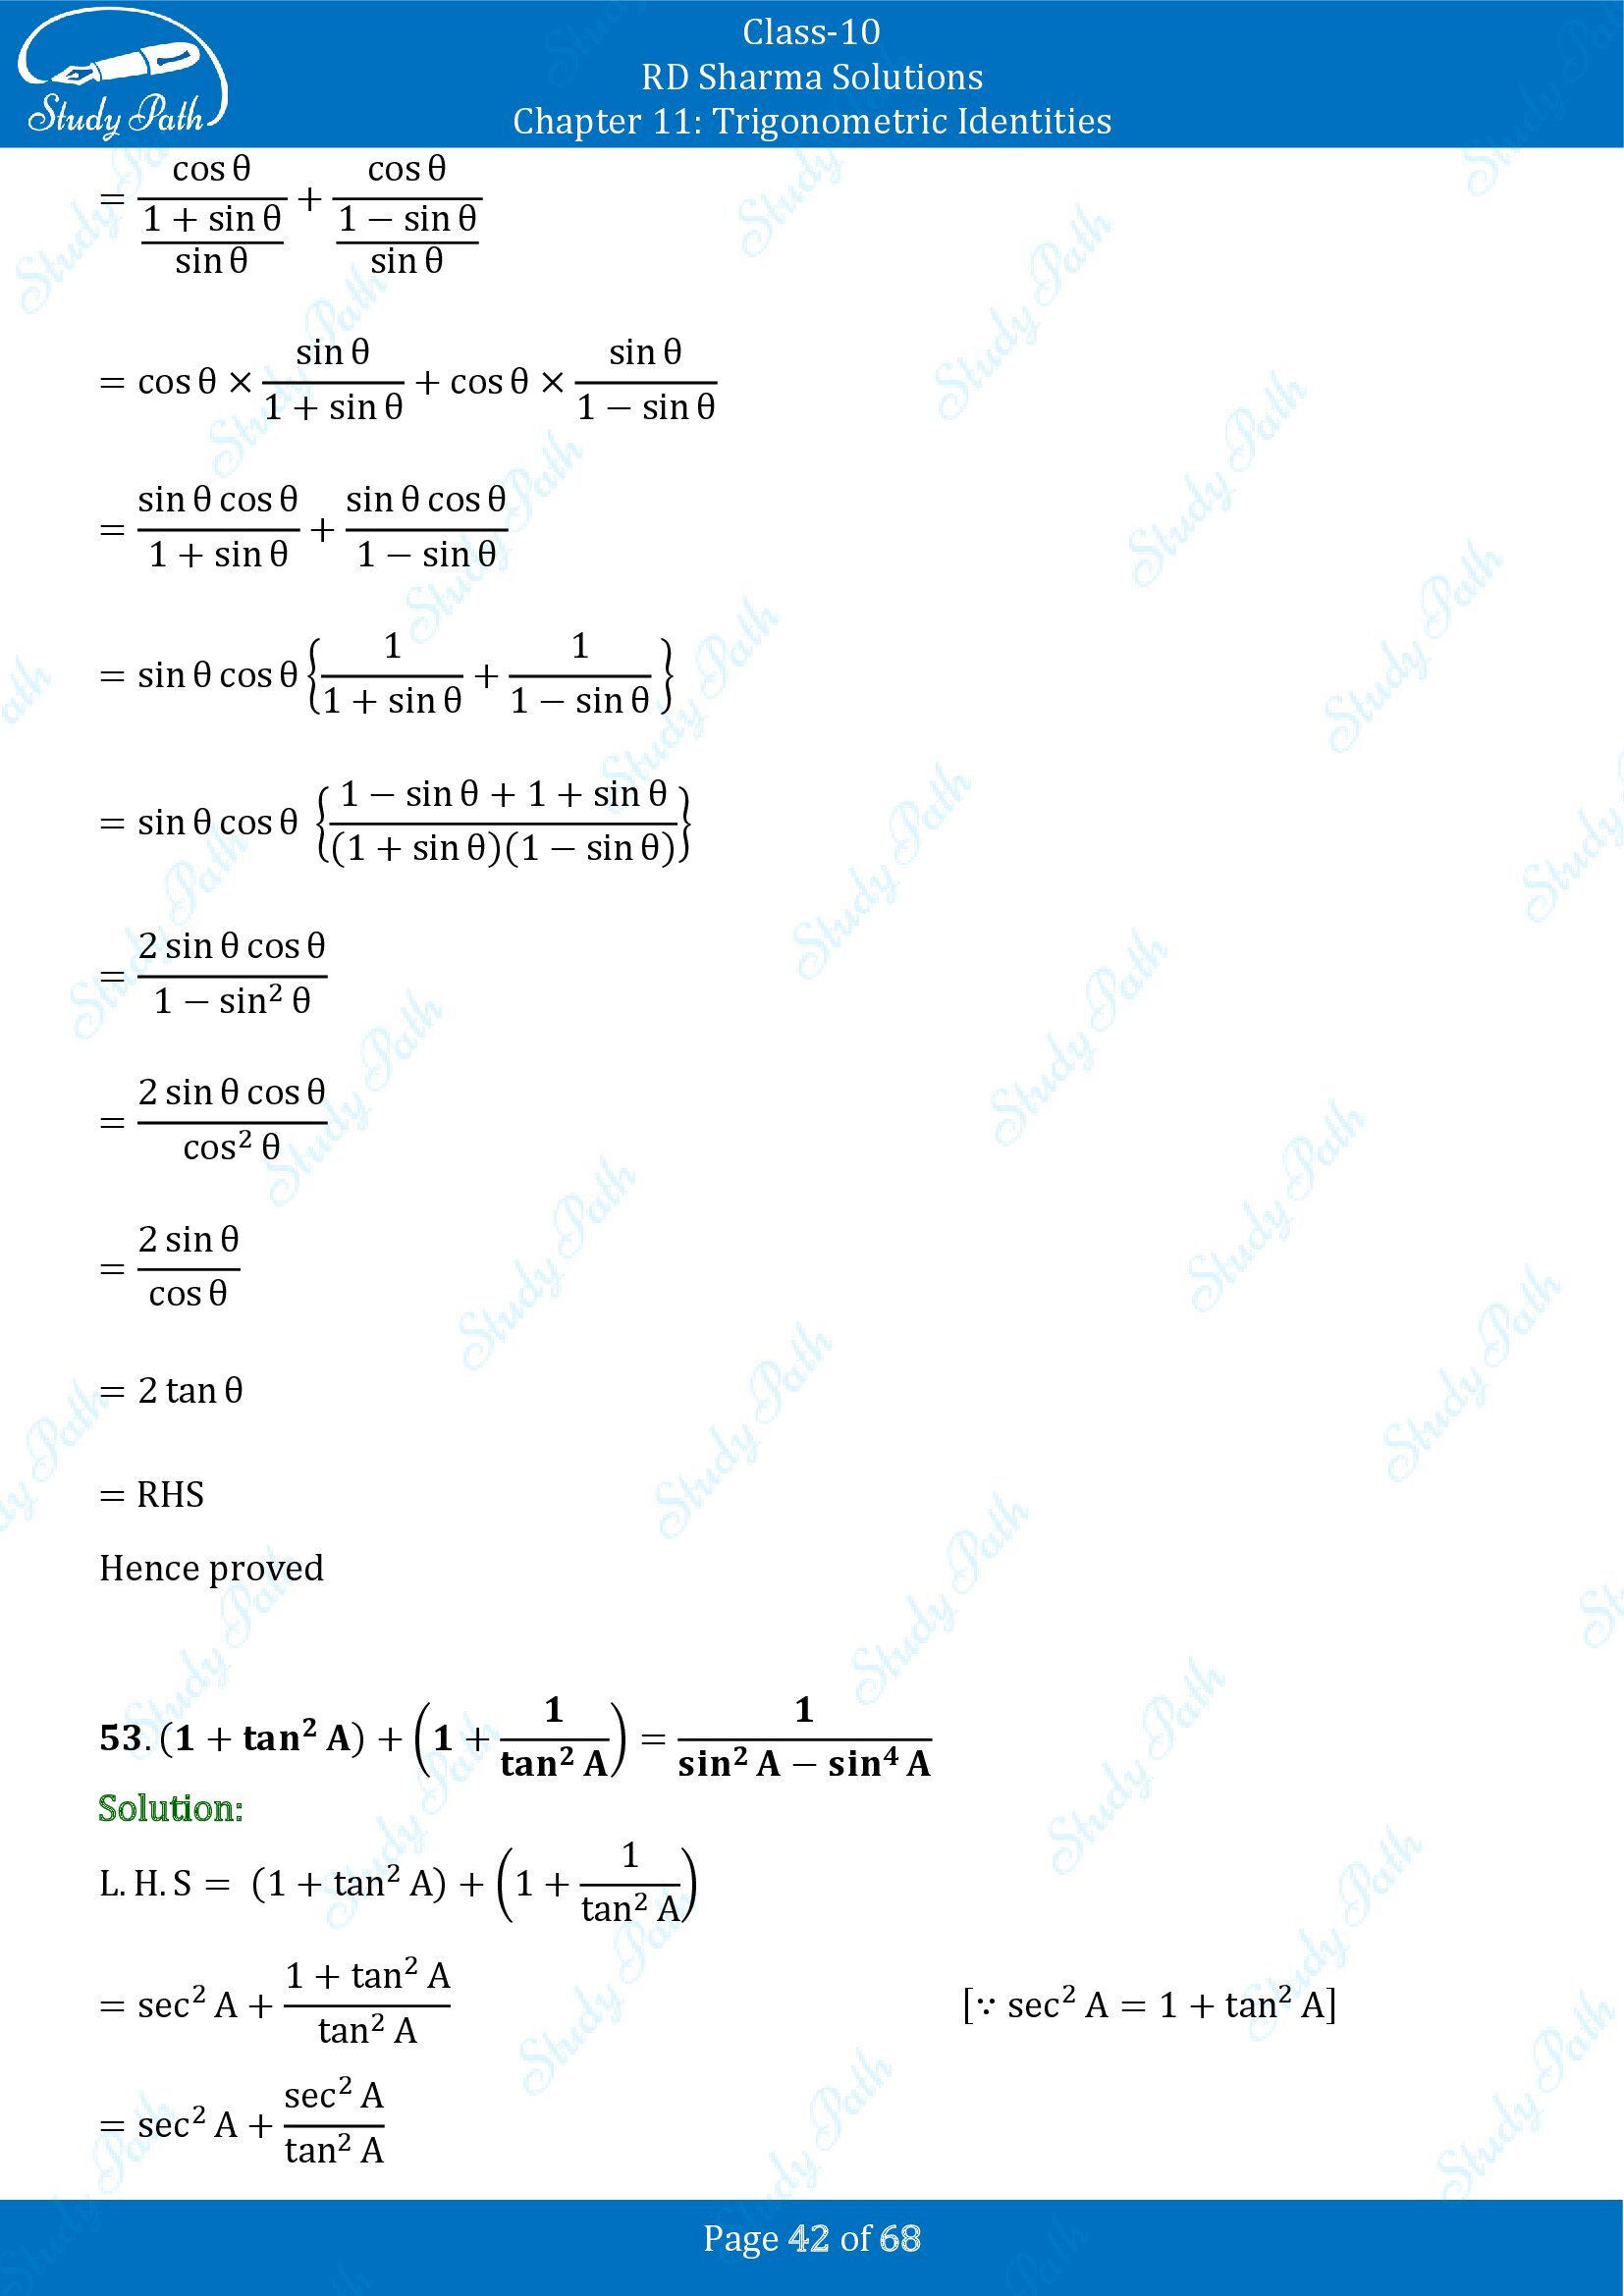 RD Sharma Solutions Class 10 Chapter 11 Trigonometric Identities Exercise 11.1 00042